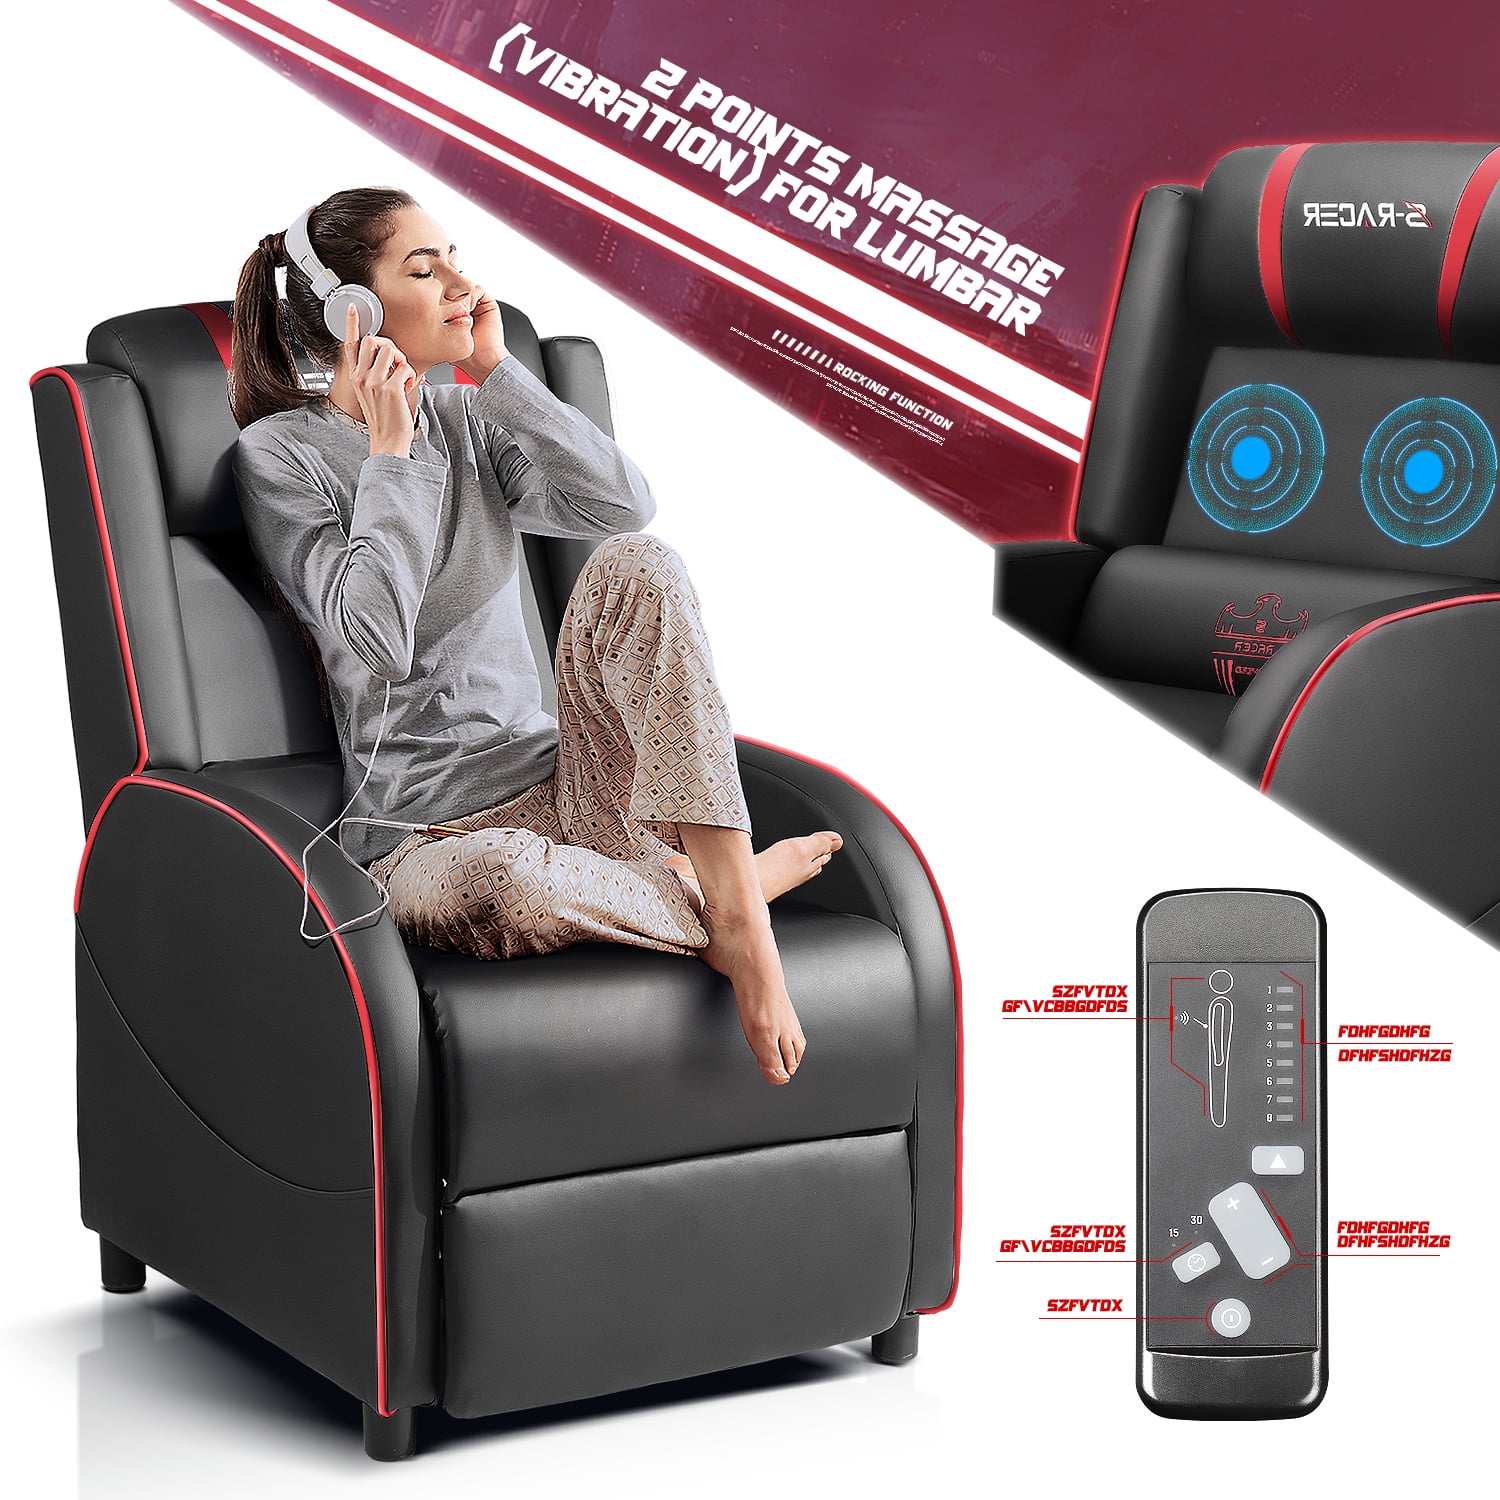 HONEY JOY Red PU Leather Gaming Recliner Chair Single Massage